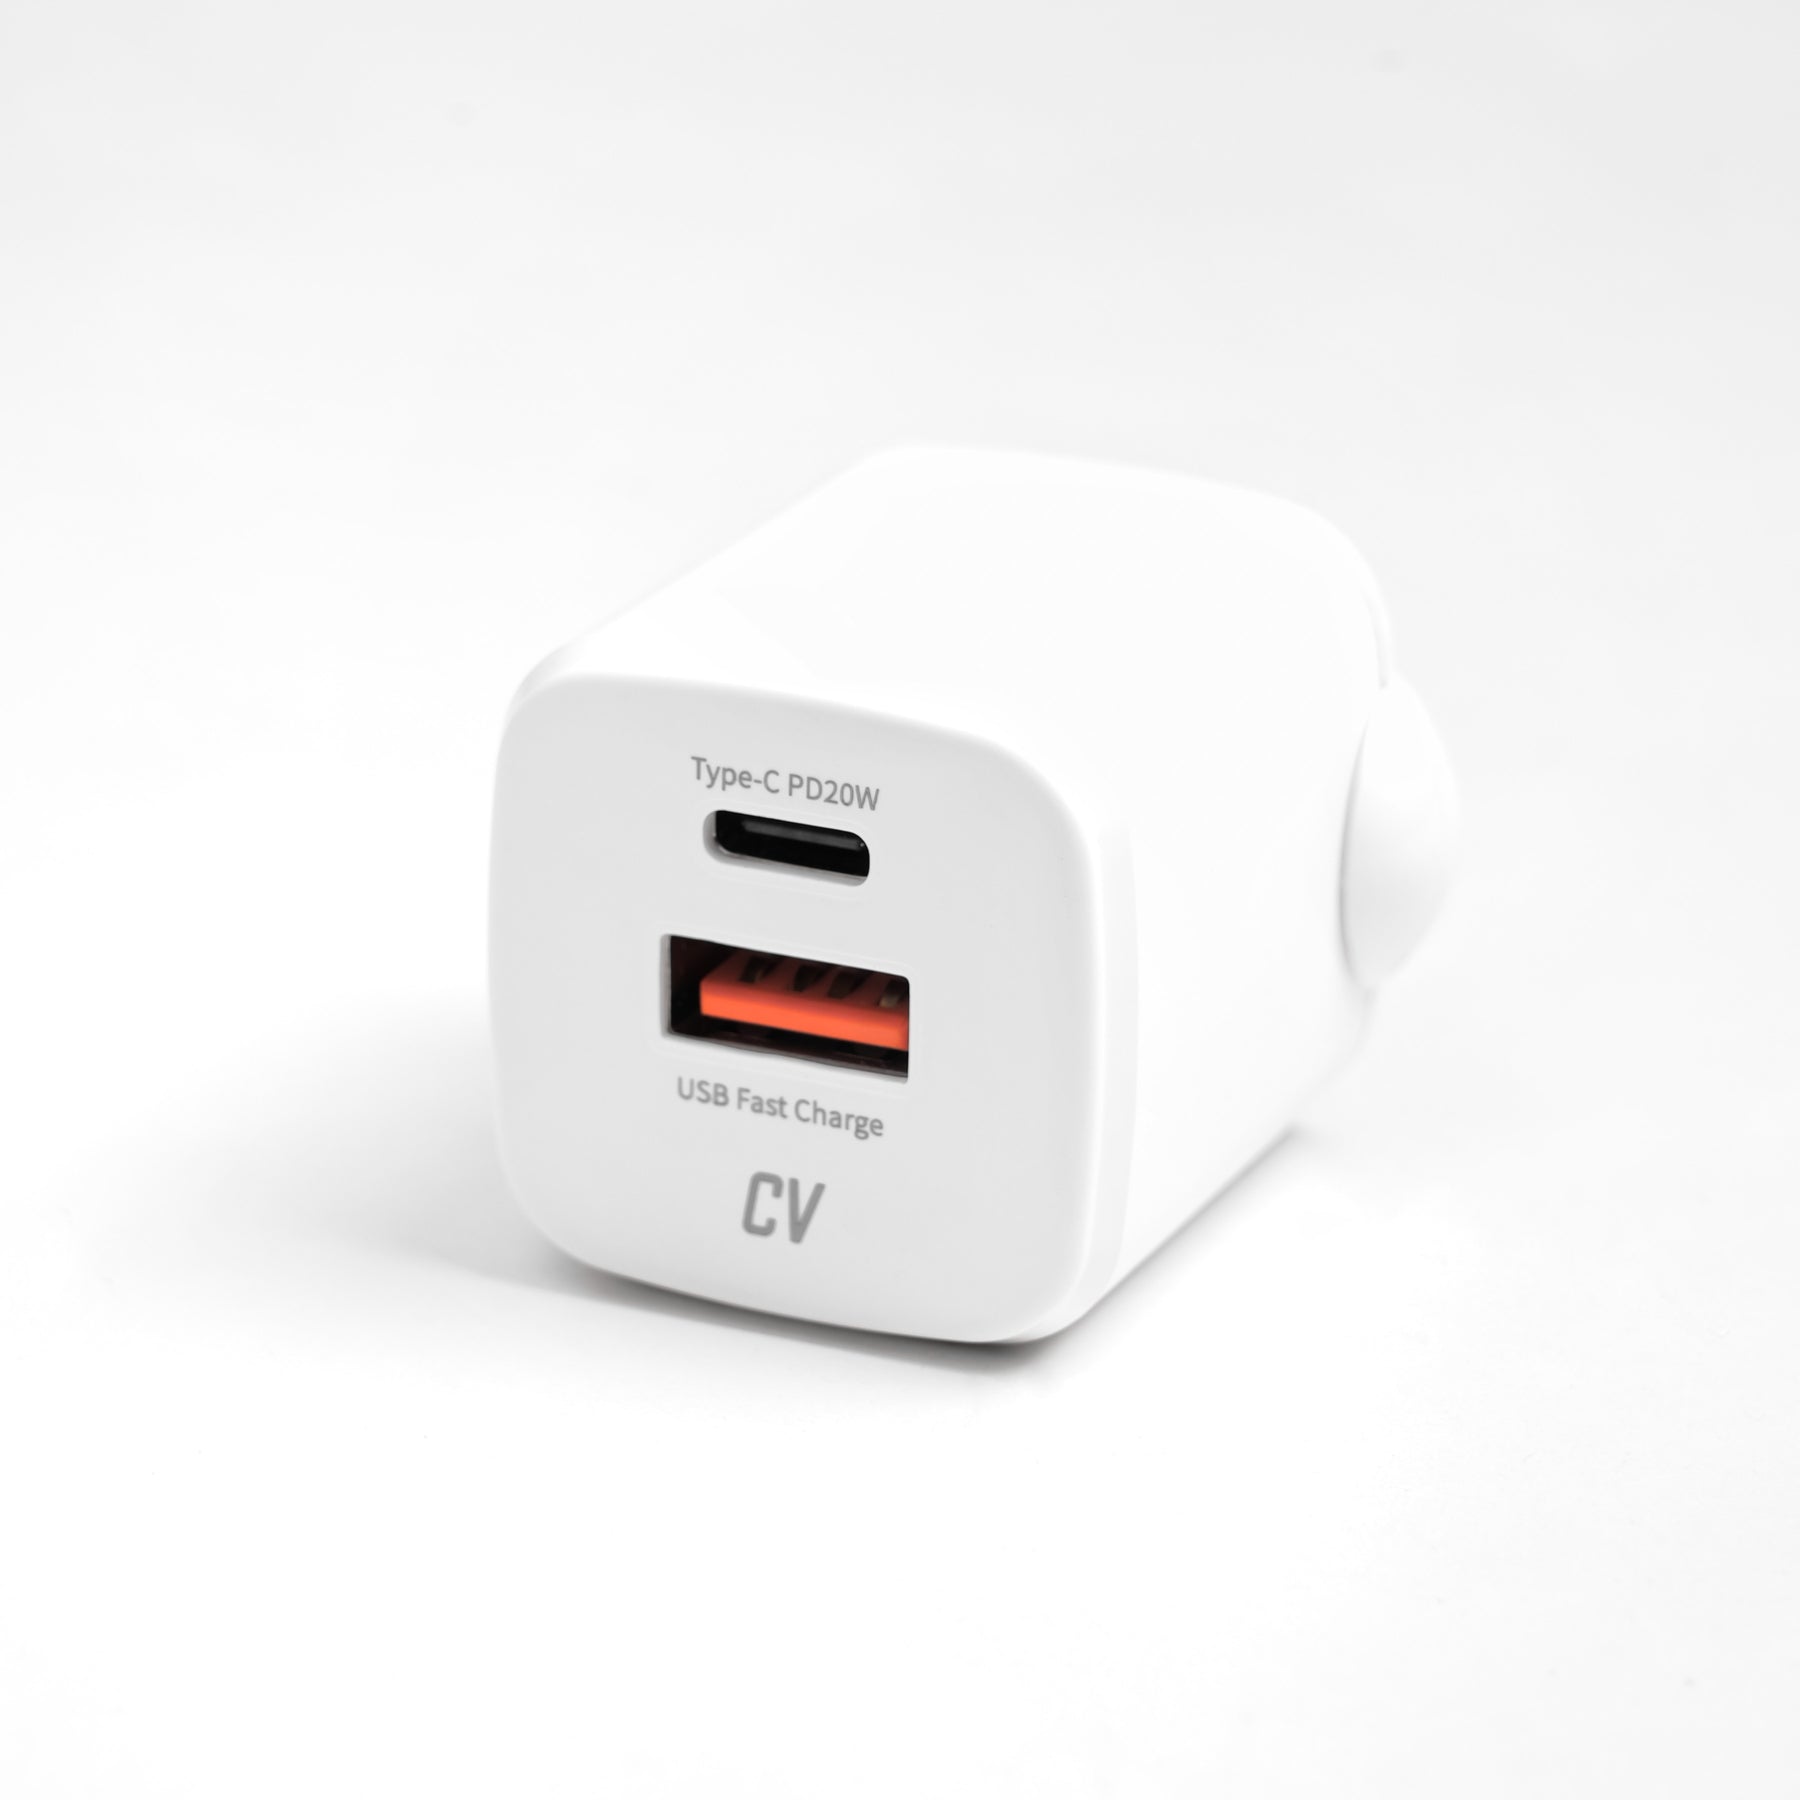 Photon 20 PD20W Dual Port Type C and USB Wall Charger Adapter for iOS & Android devices